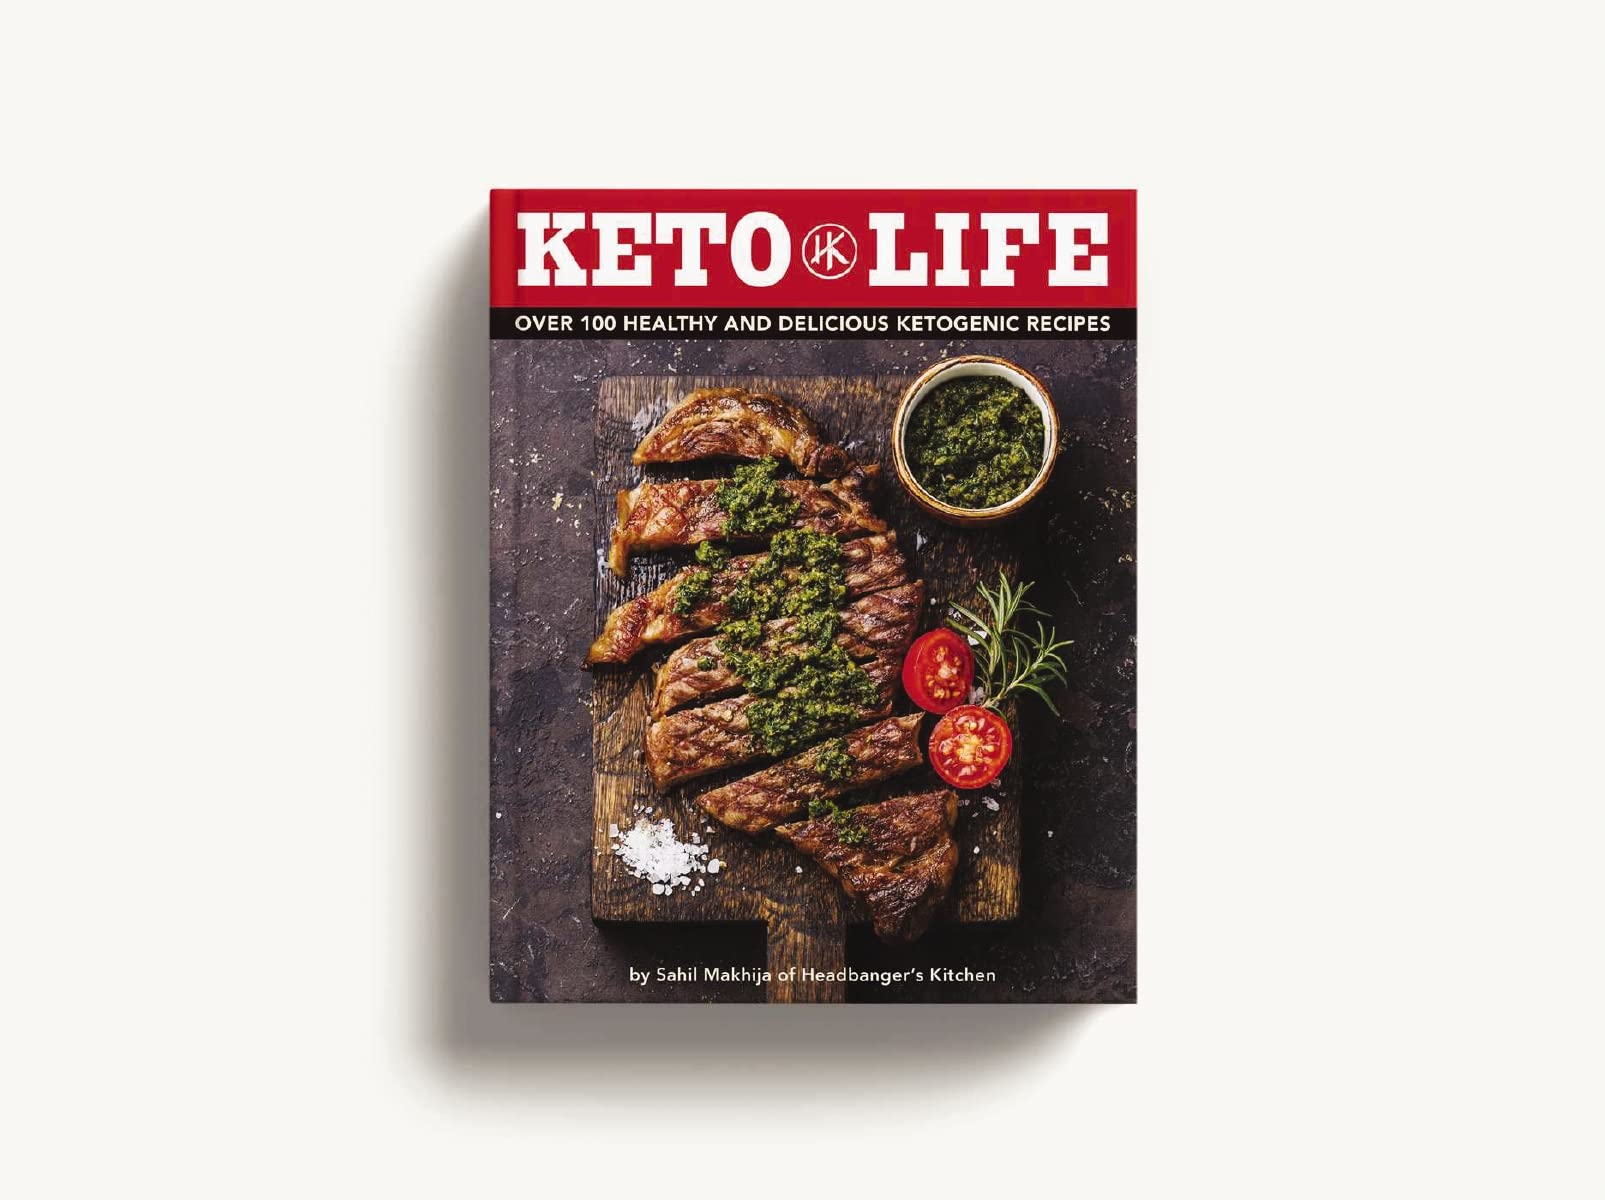 Keto Life: Over 100 Healthy and Delicious Ketogenic Recipes (Healthy Cookbooks, Ketogenic Cooking, Fitness Recipes, Diet Nutrition Information, Gift ... and Healthy Food, Simple and Easy Recipes)